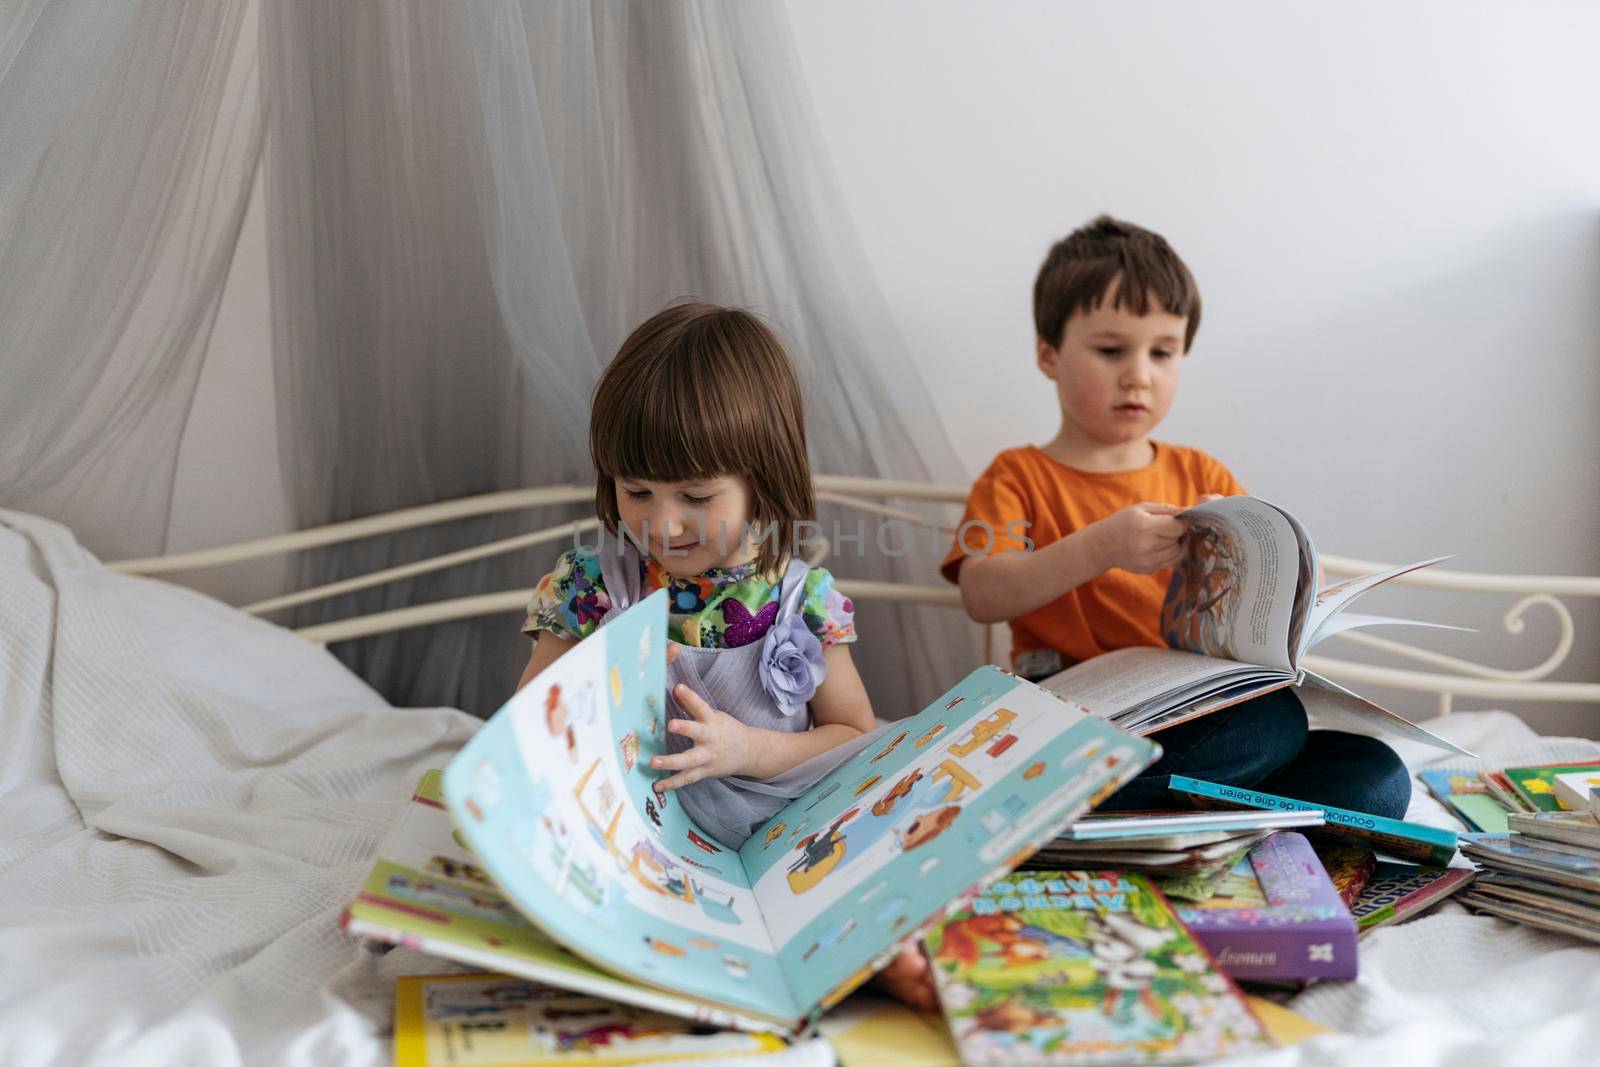 Two siblings reading books on the sofa by Varaksina